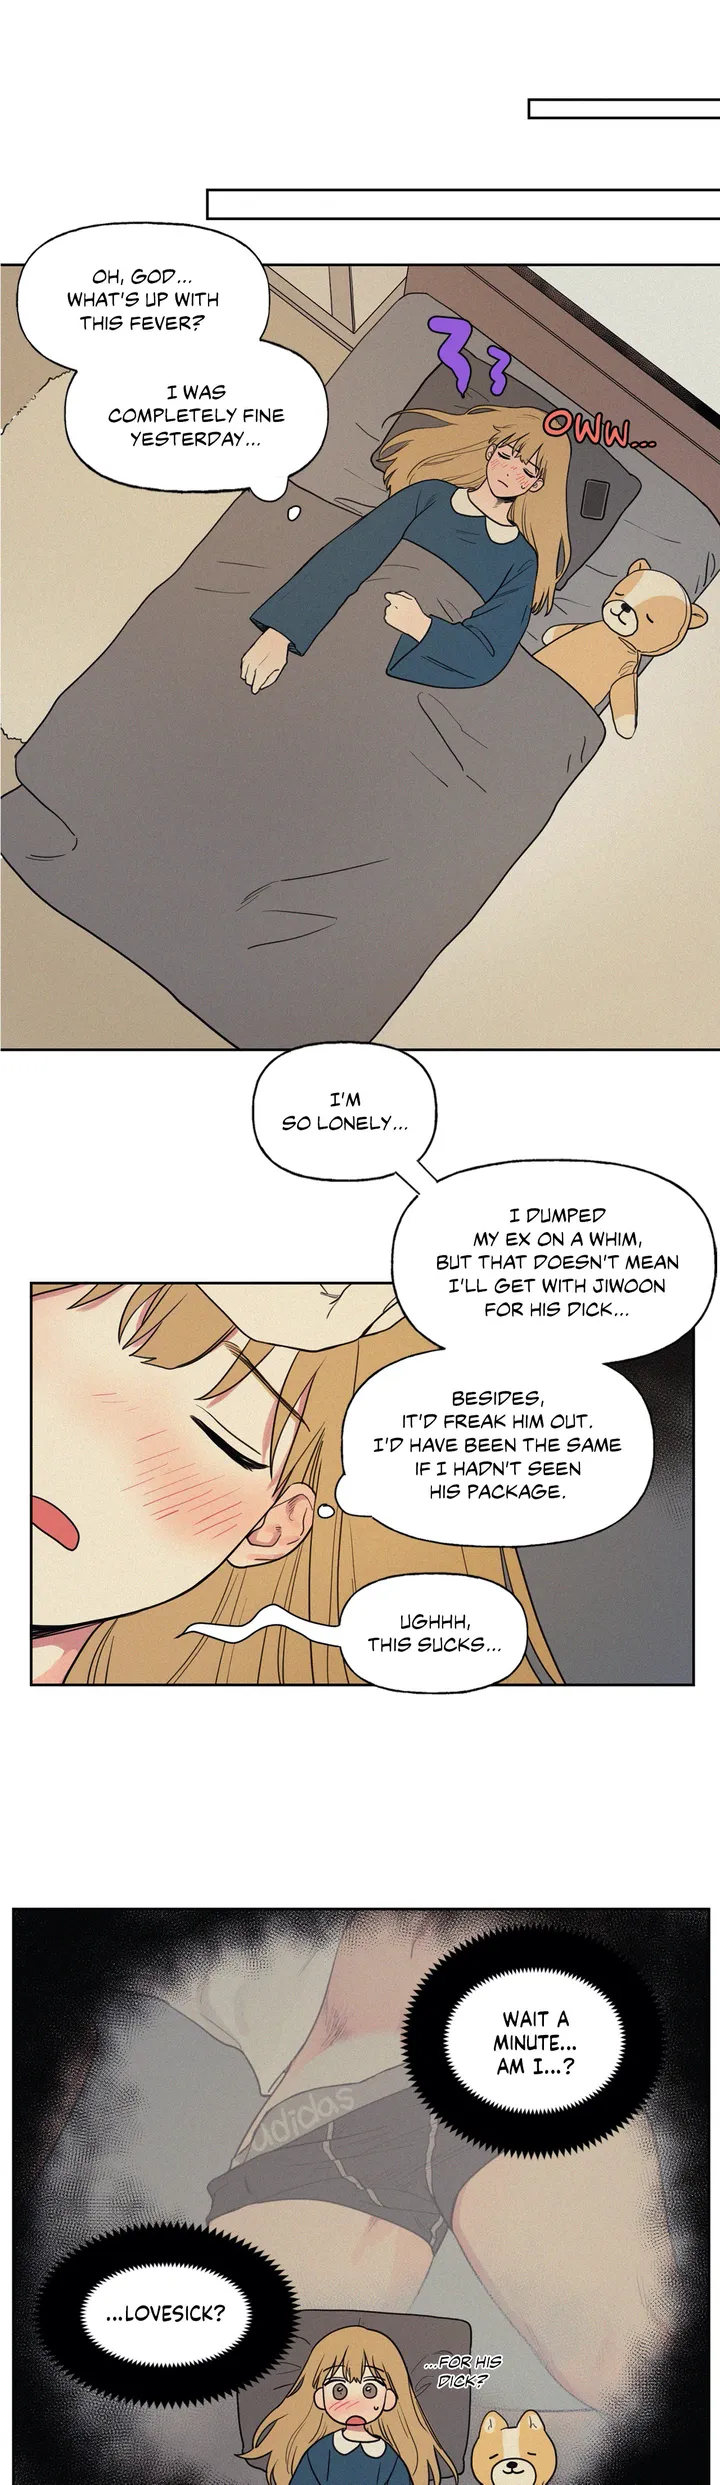 My Friend’s Hidden Charm - Chapter 1 Page 20